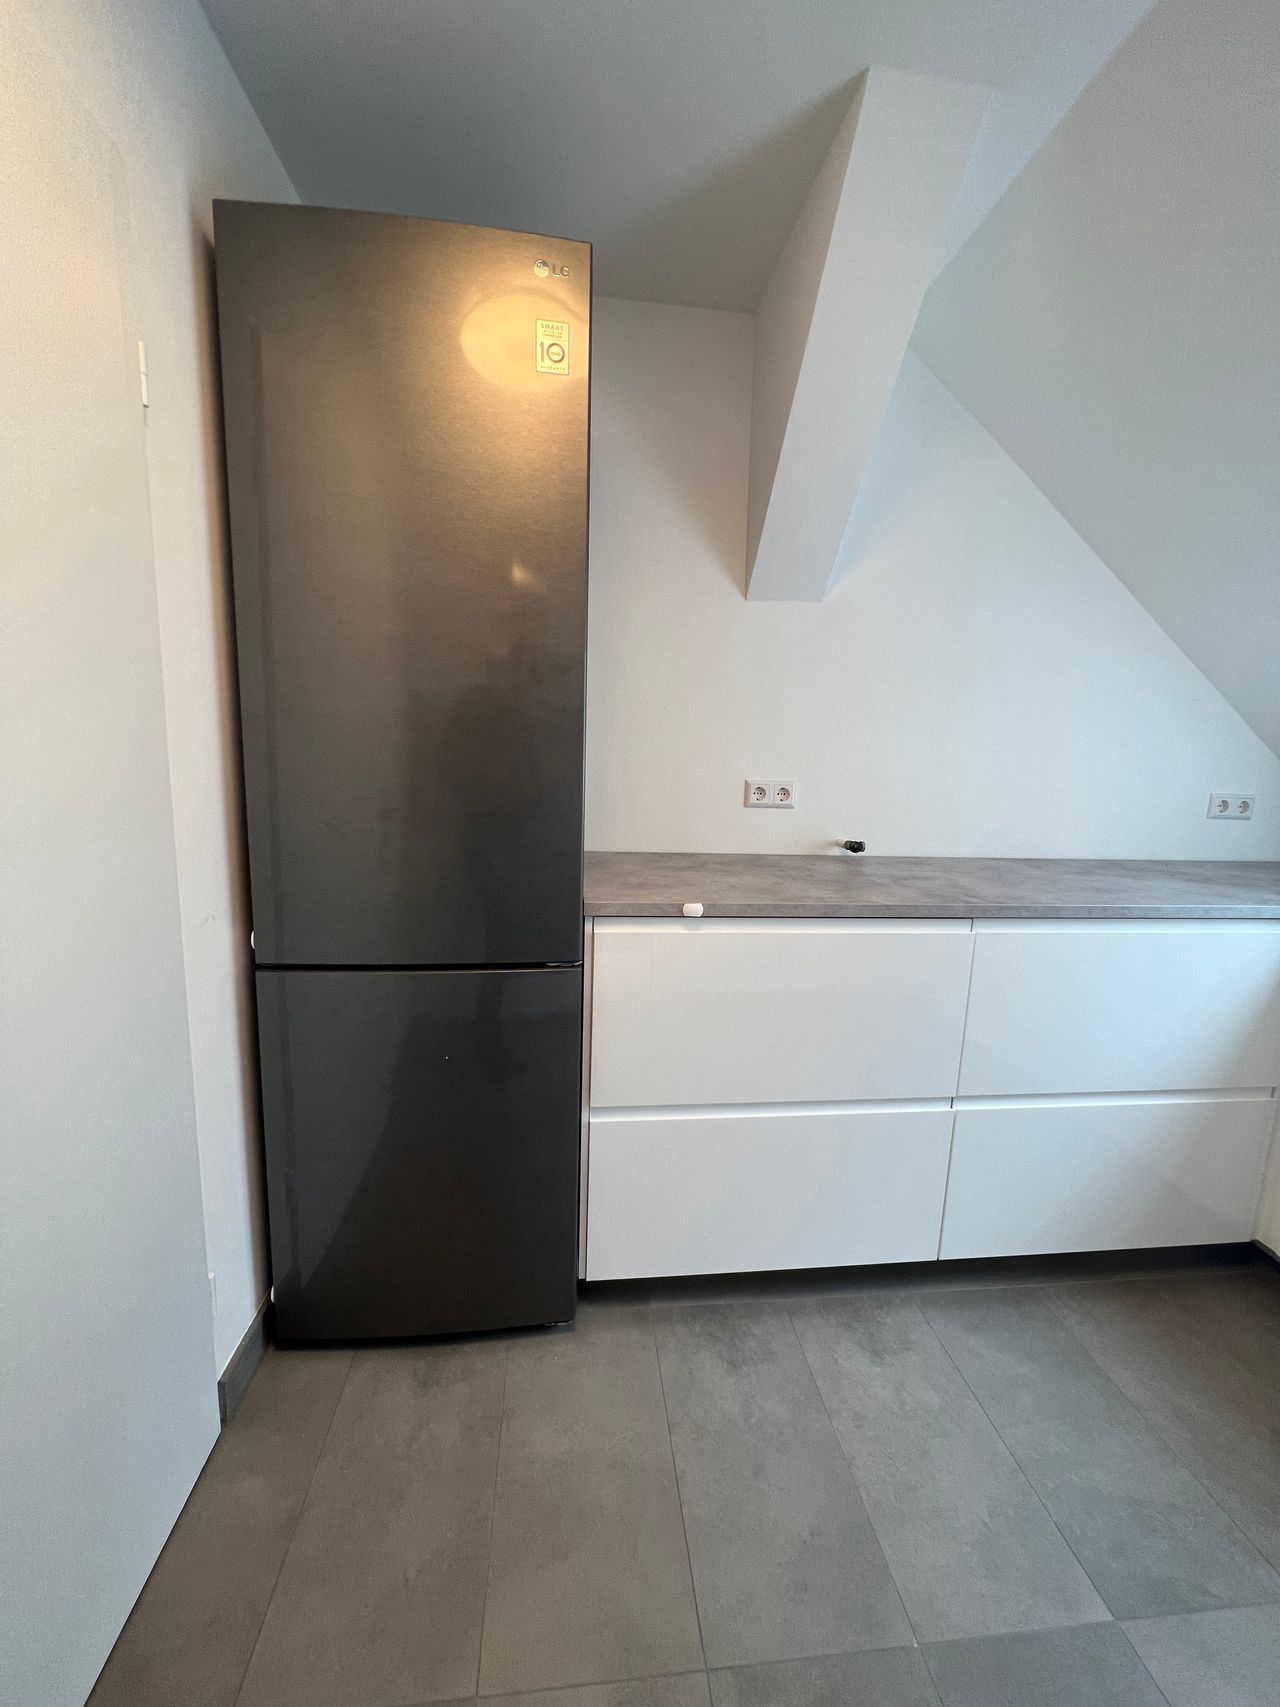 Modern and Stylish 2-Room Apartment at Rathaus Steglitz, Very Central to FU University